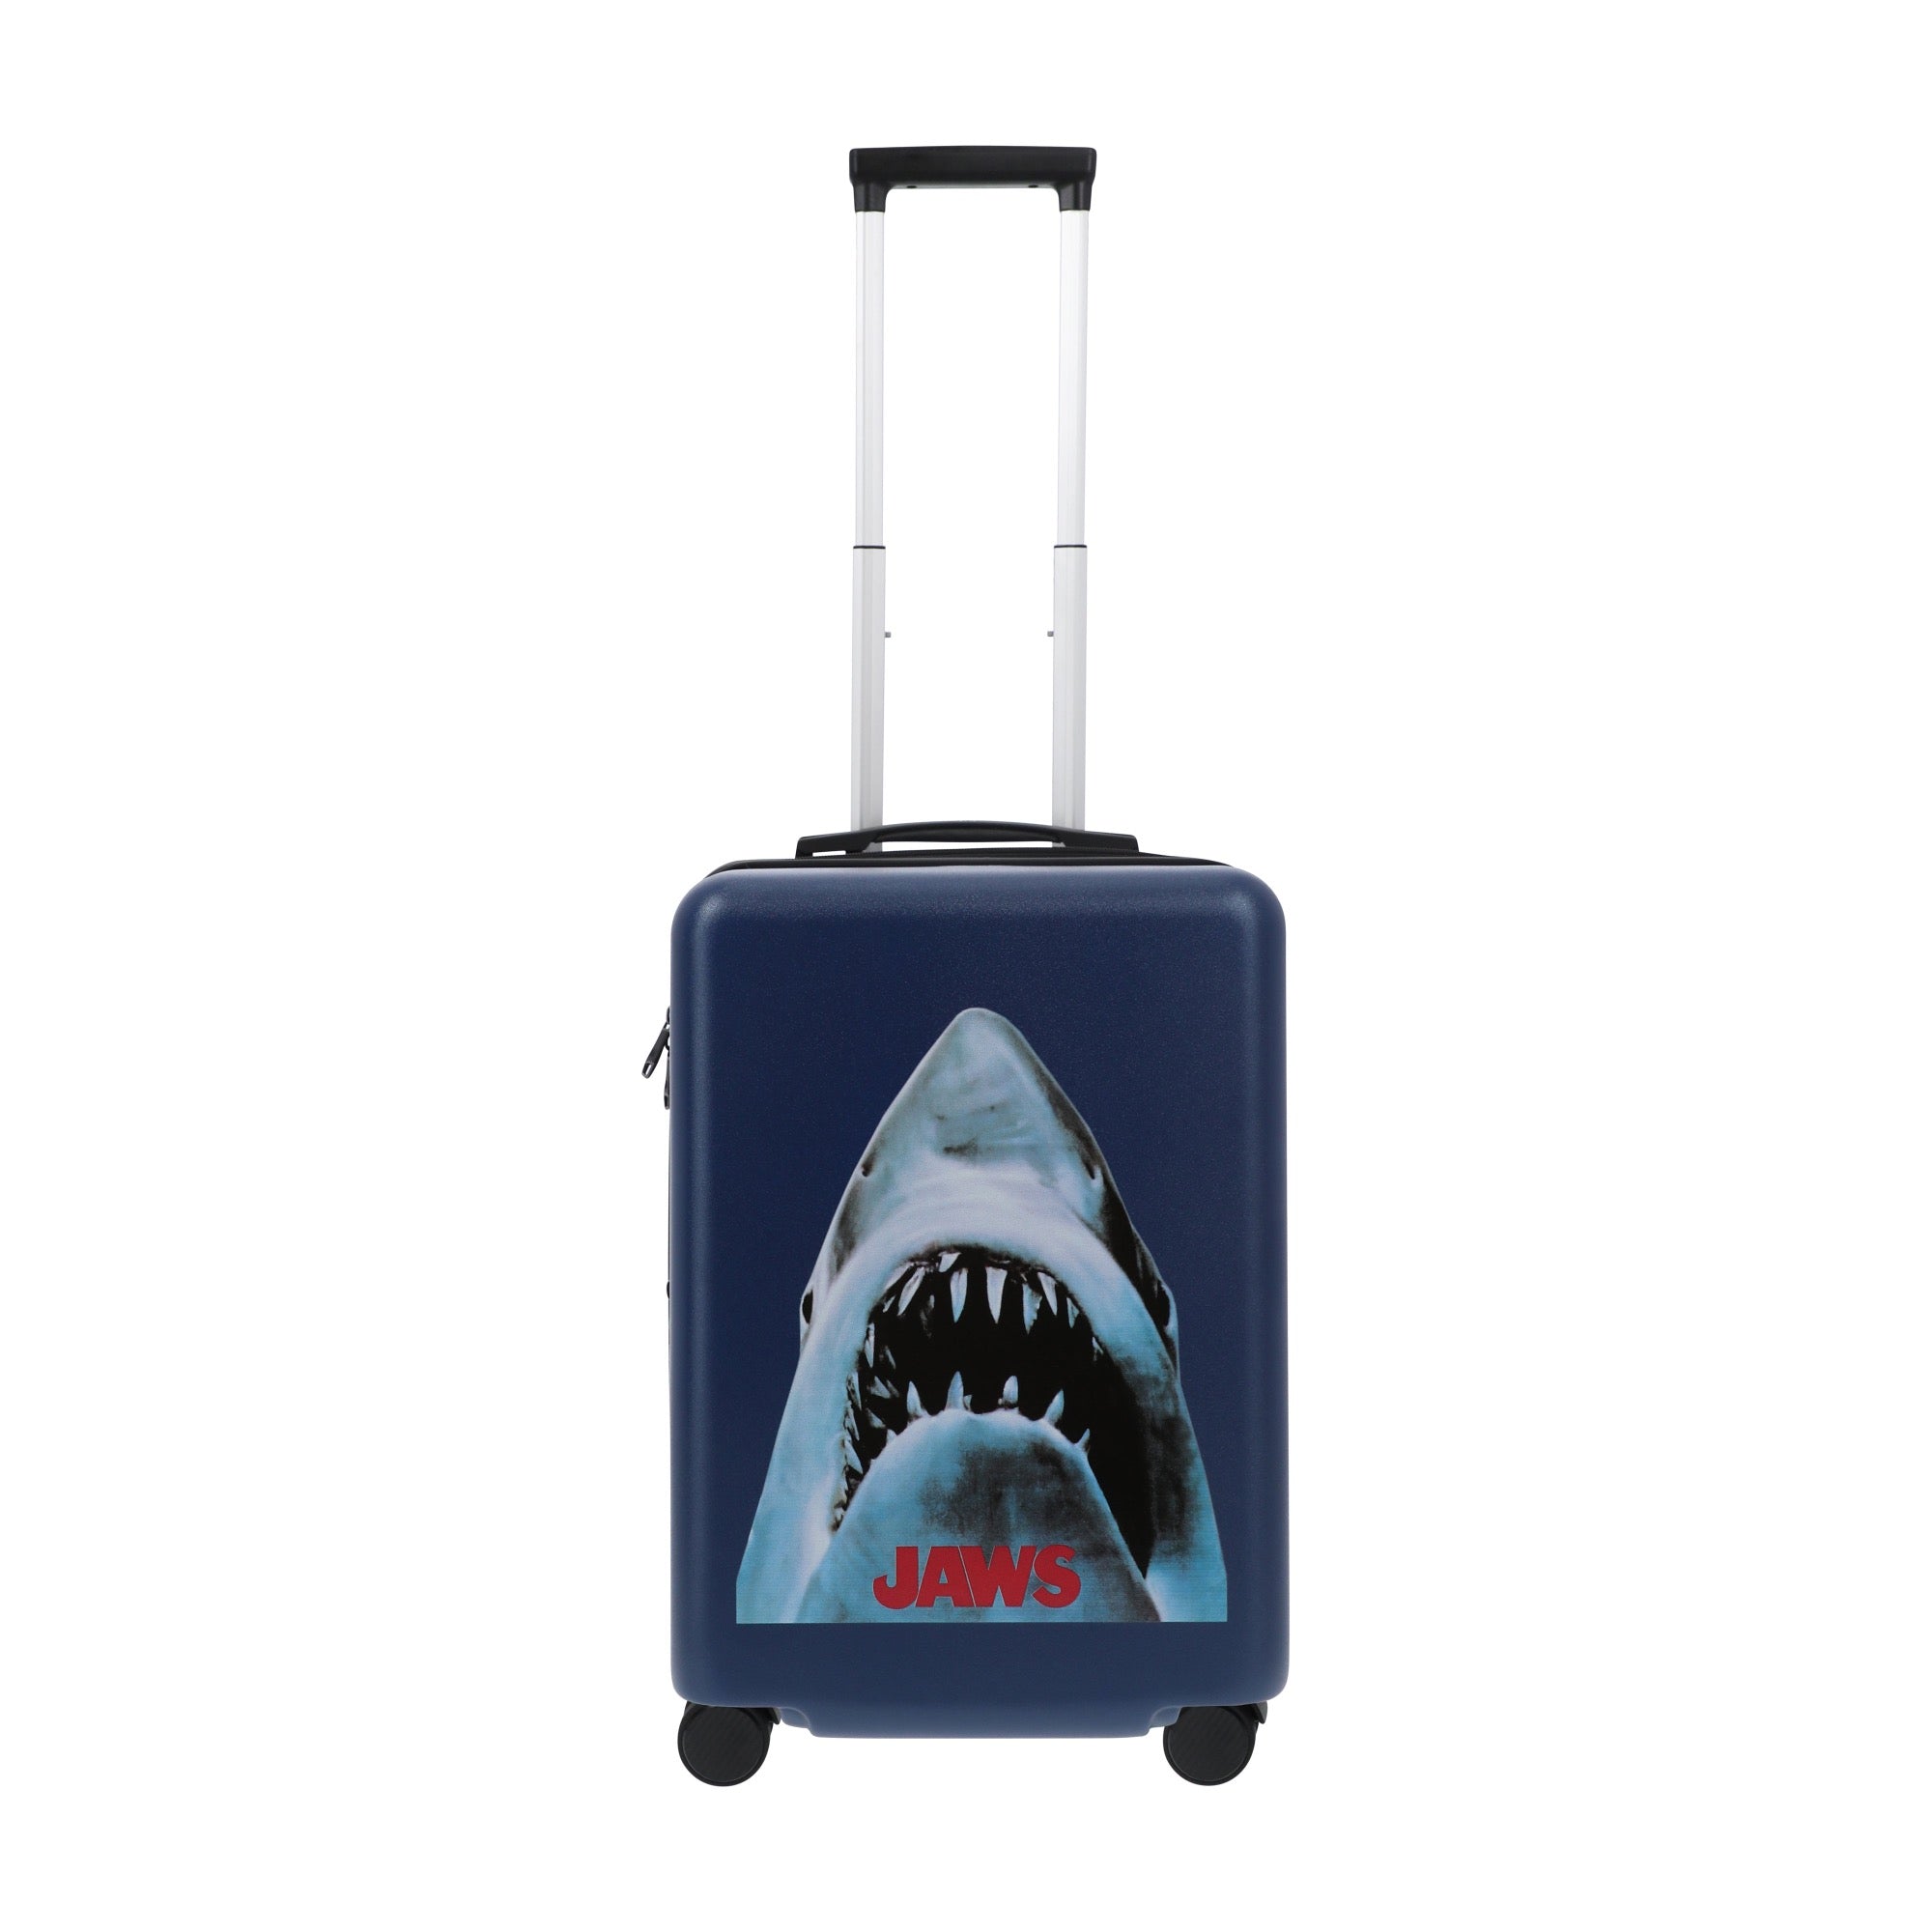 Navy blue NBC studios jaws 22.5" carry-on spinner suitcase luggage by Ful